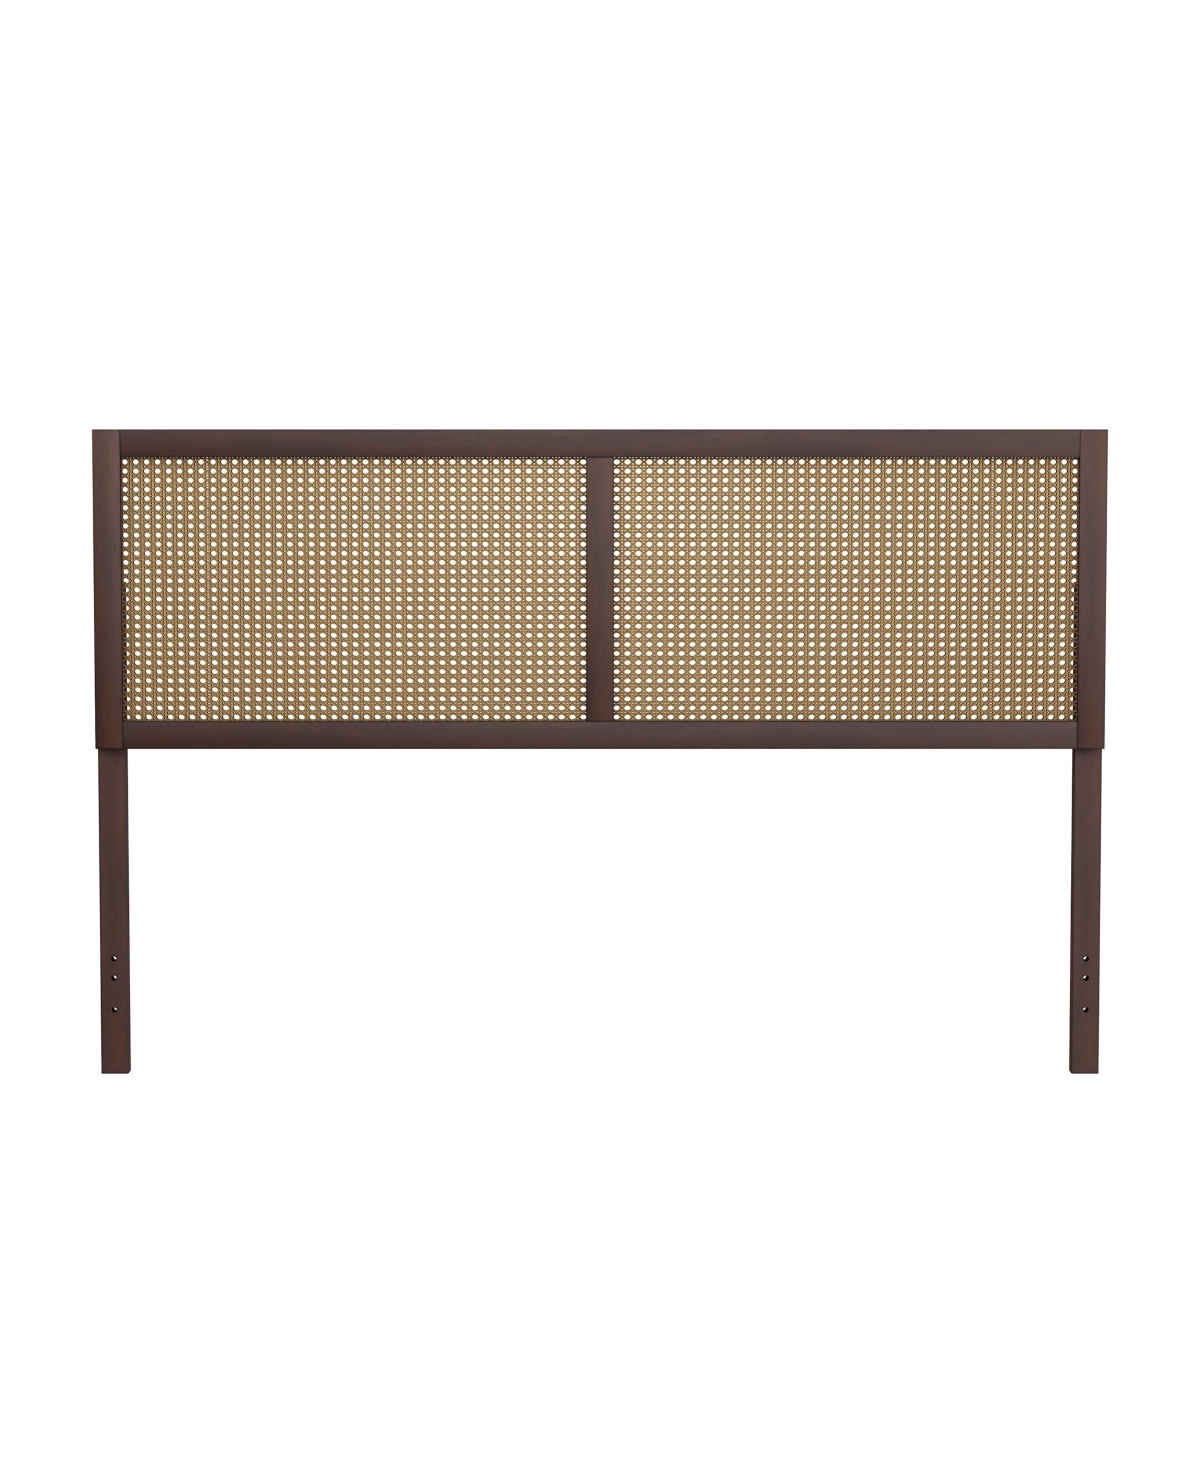 Hillsdale 50" Wood And Cane Panel Serena Furniture King Headboard In Chocolate